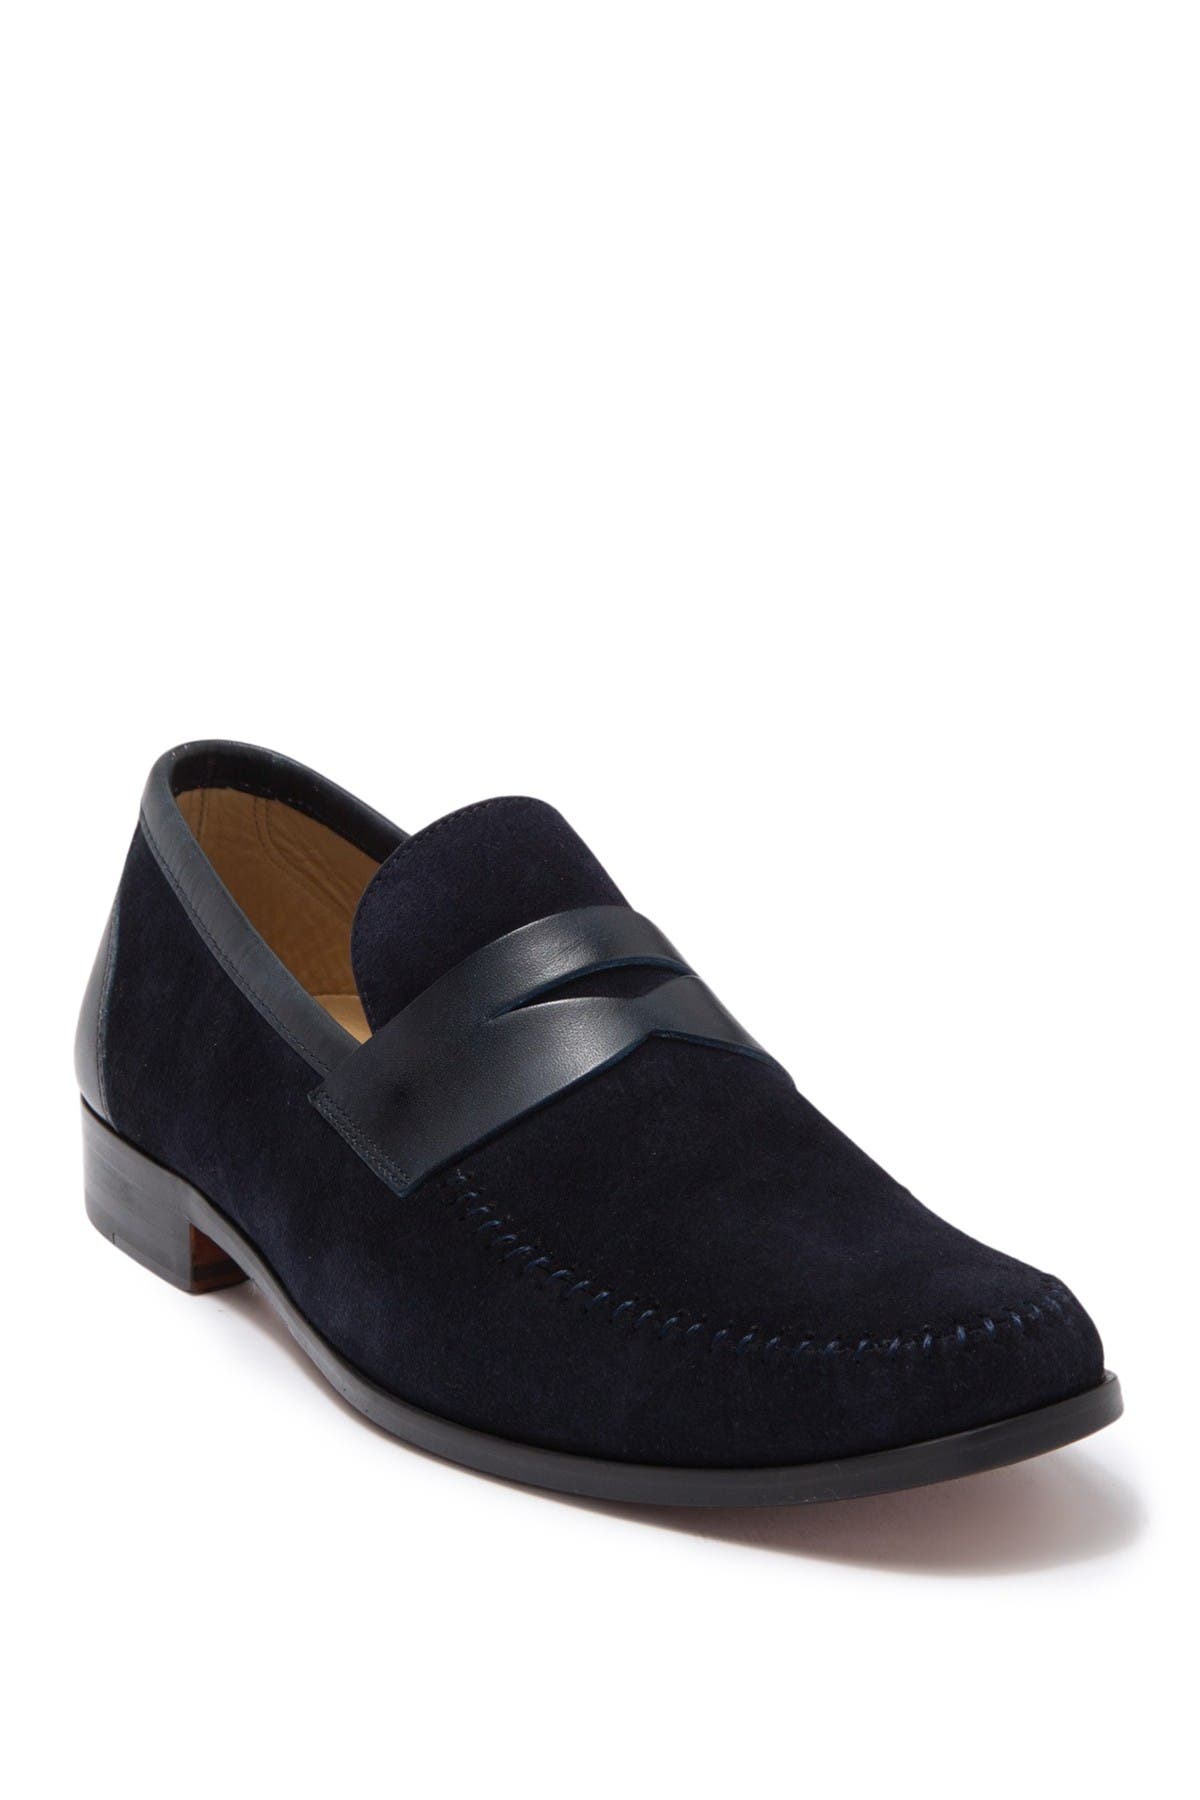 magnanni mens loafers